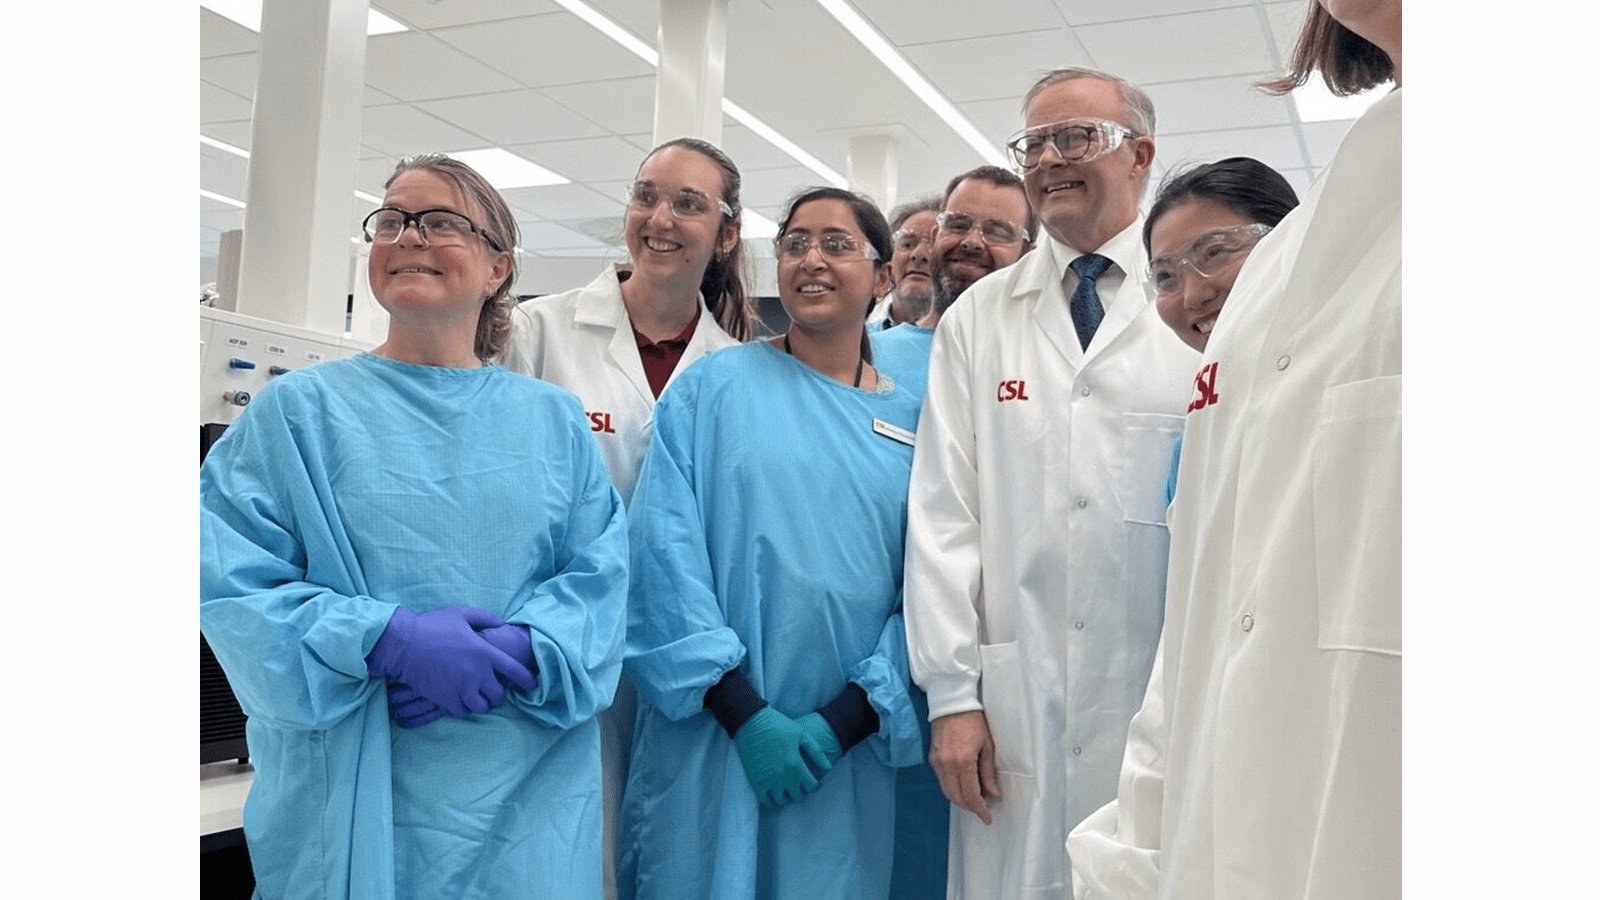 Prime Minister of Australia The Hon Anthony Albanese MP visits science labs at CSL's new headquarters in Melbourne.